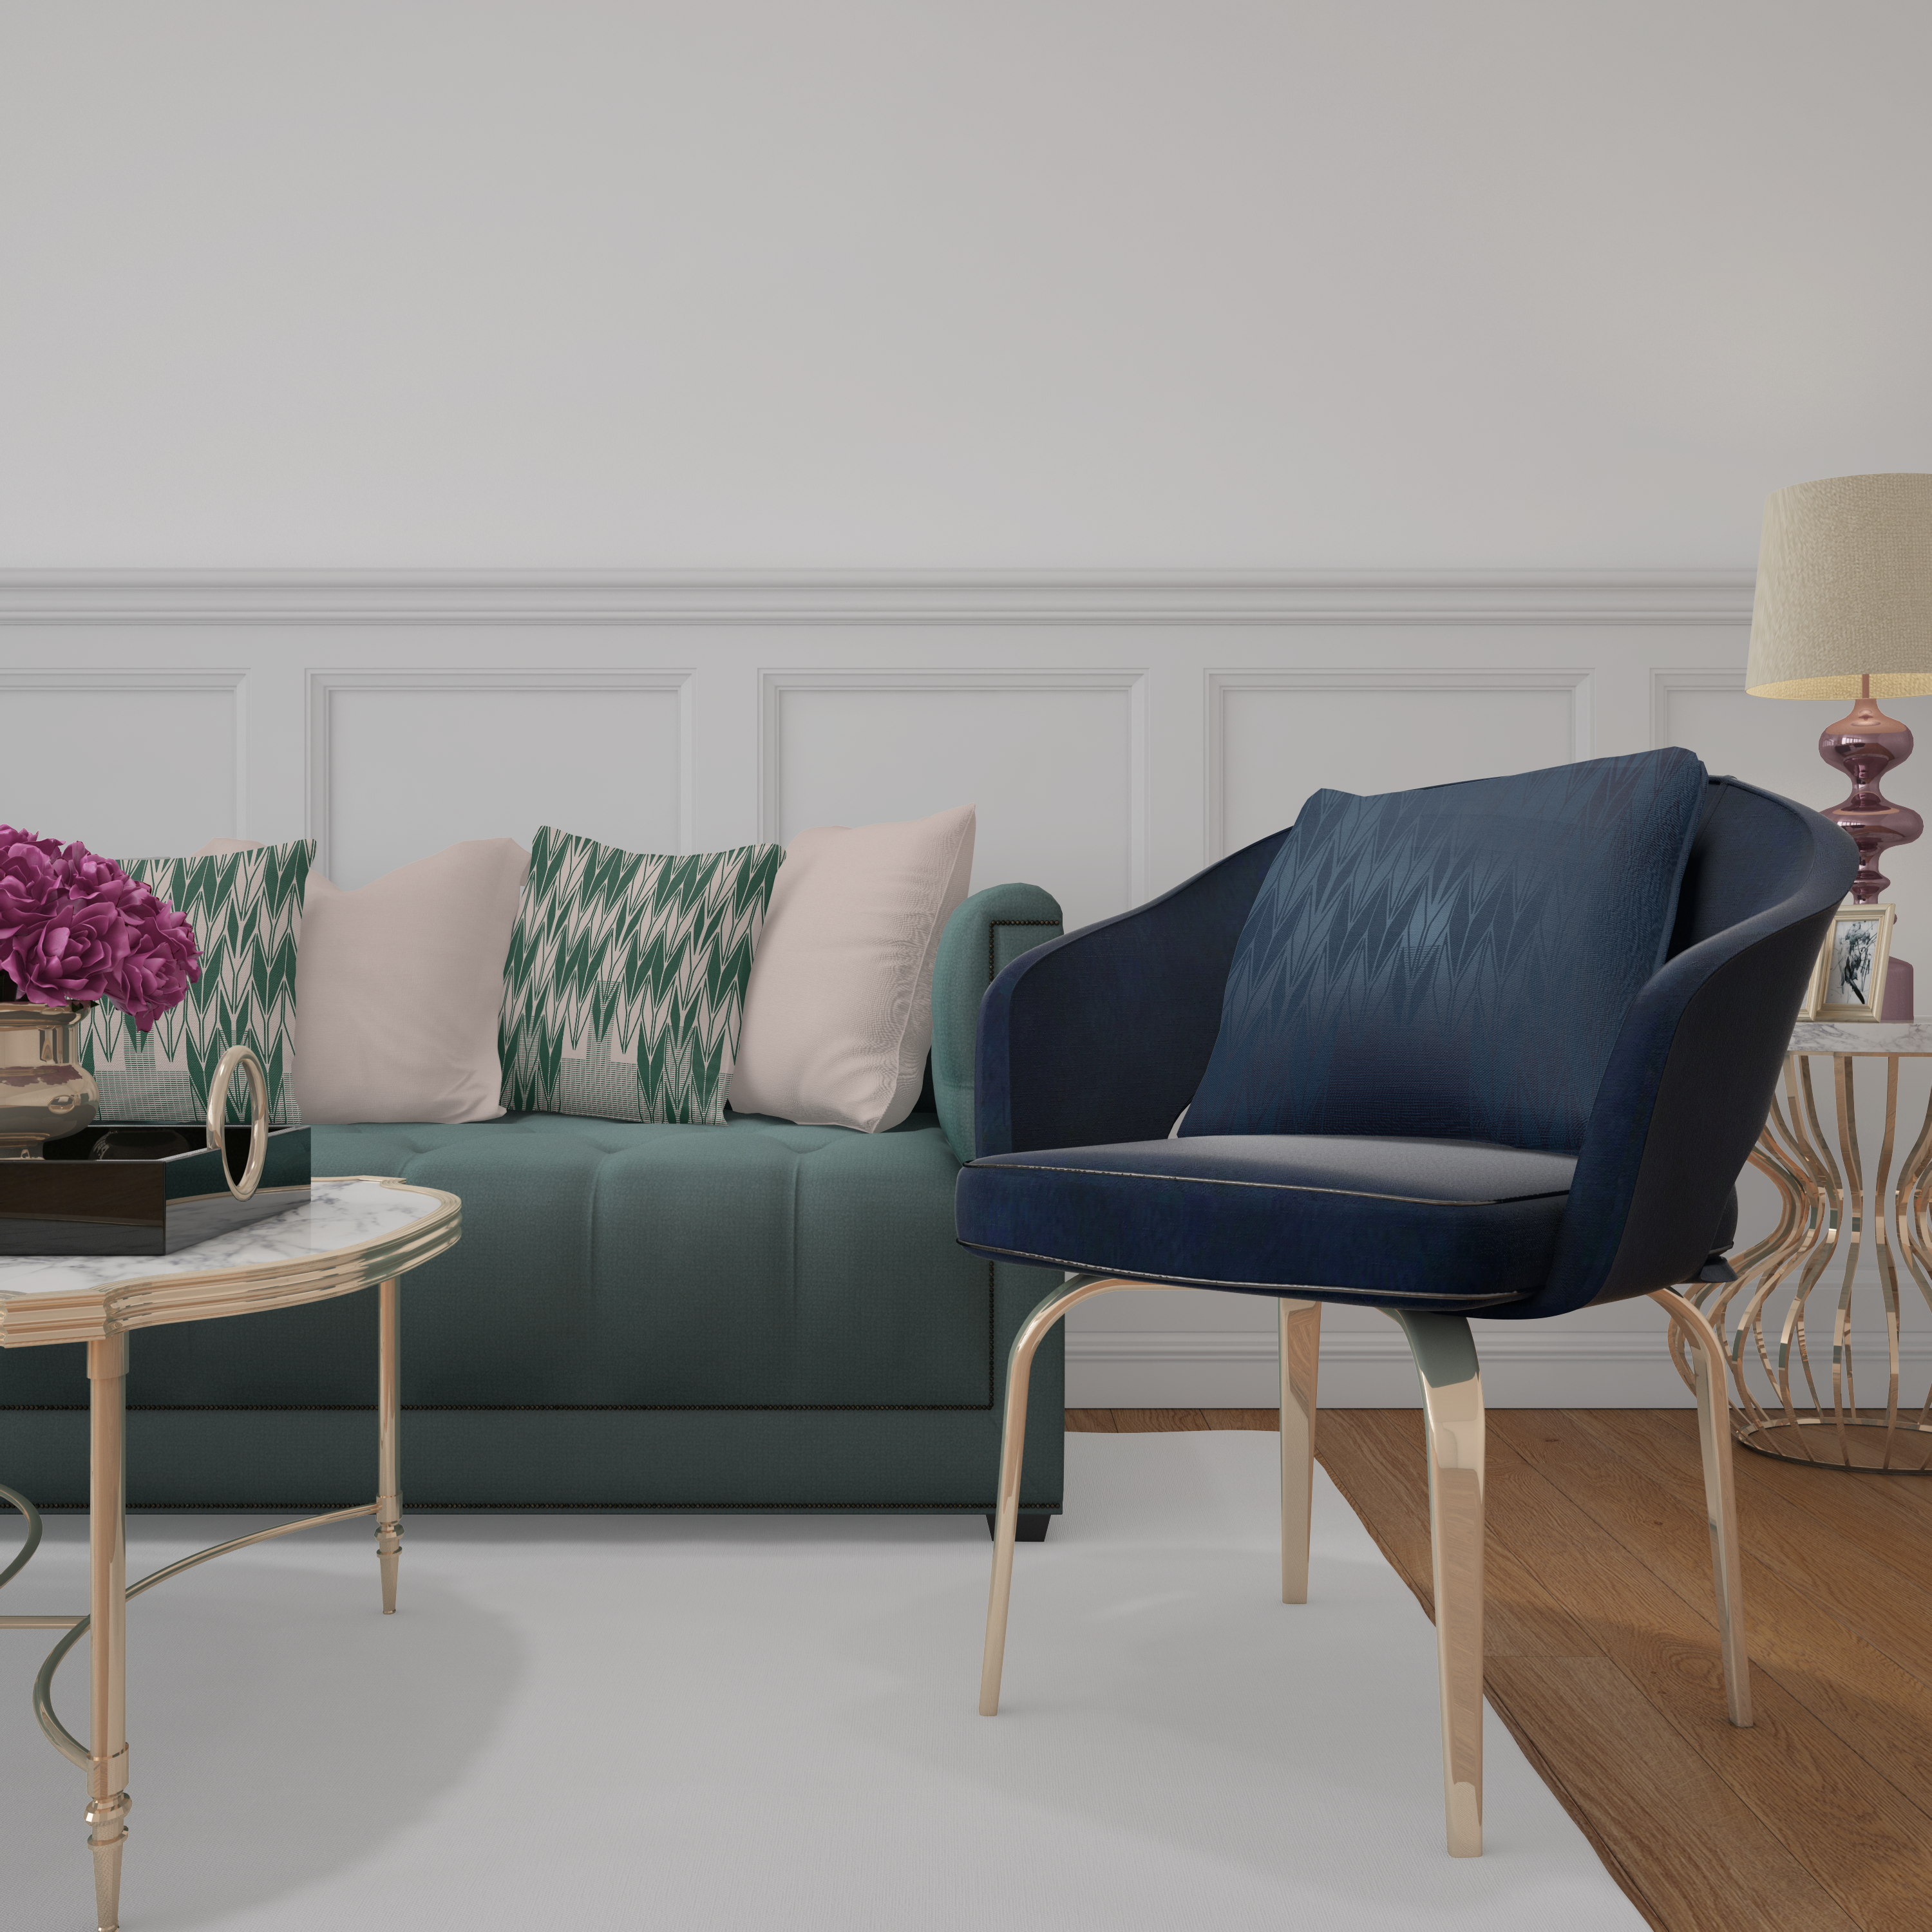 Living Room Mockup_Green Couch & Blue Chair-2